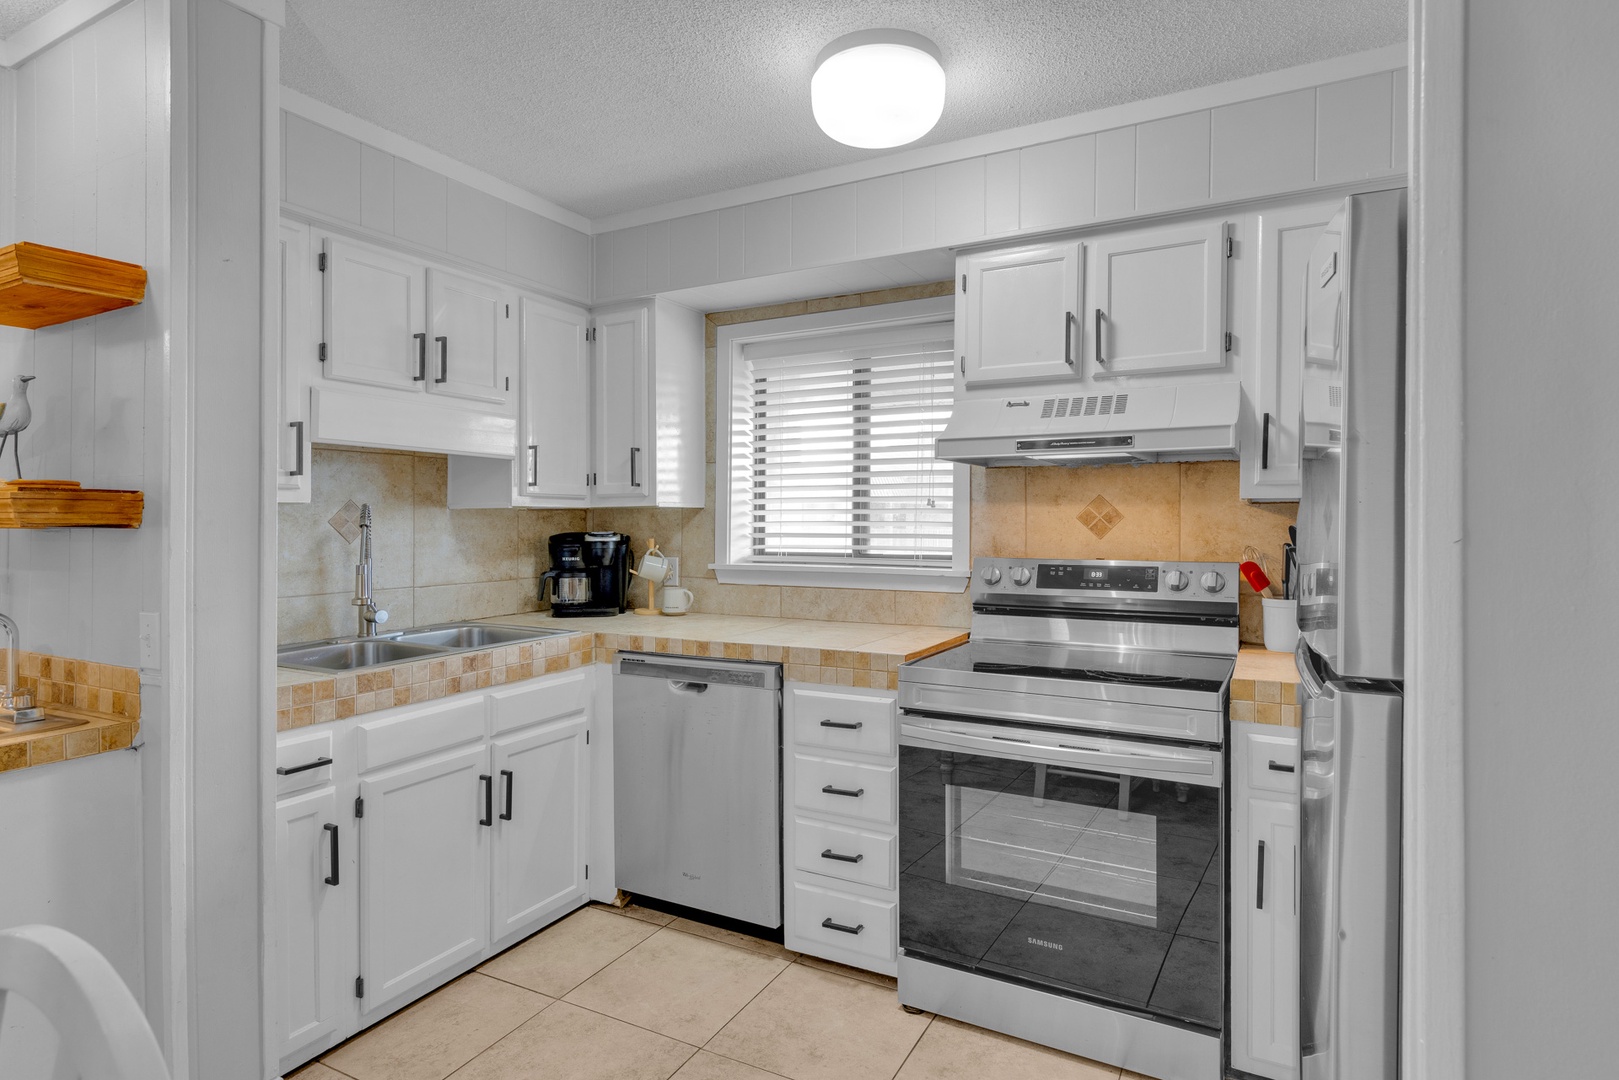 Bright fully equipped kitchen to craft culinary delights